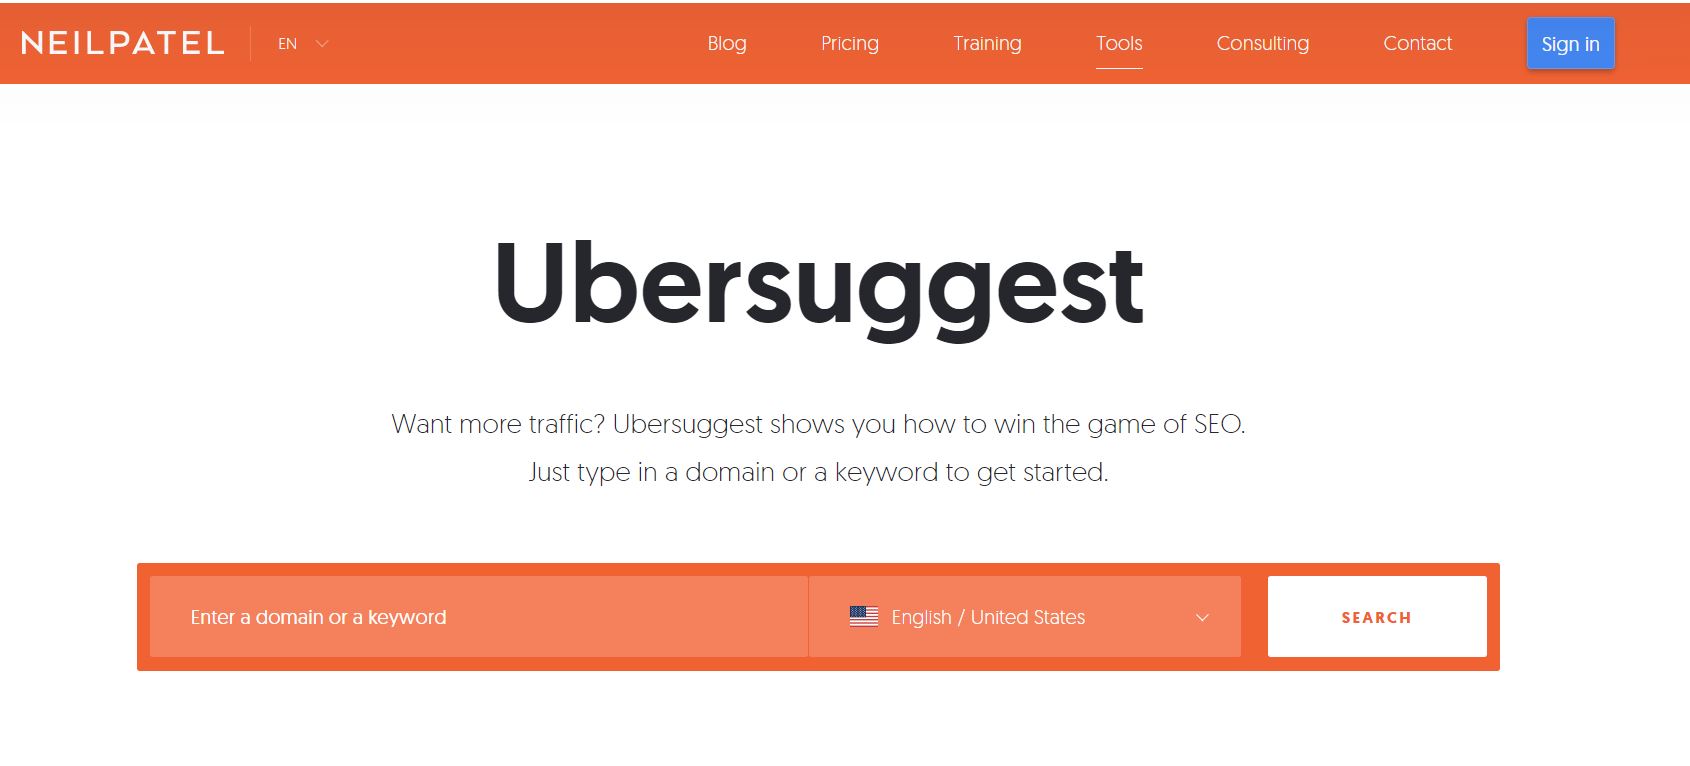 What is Ubersuggest?